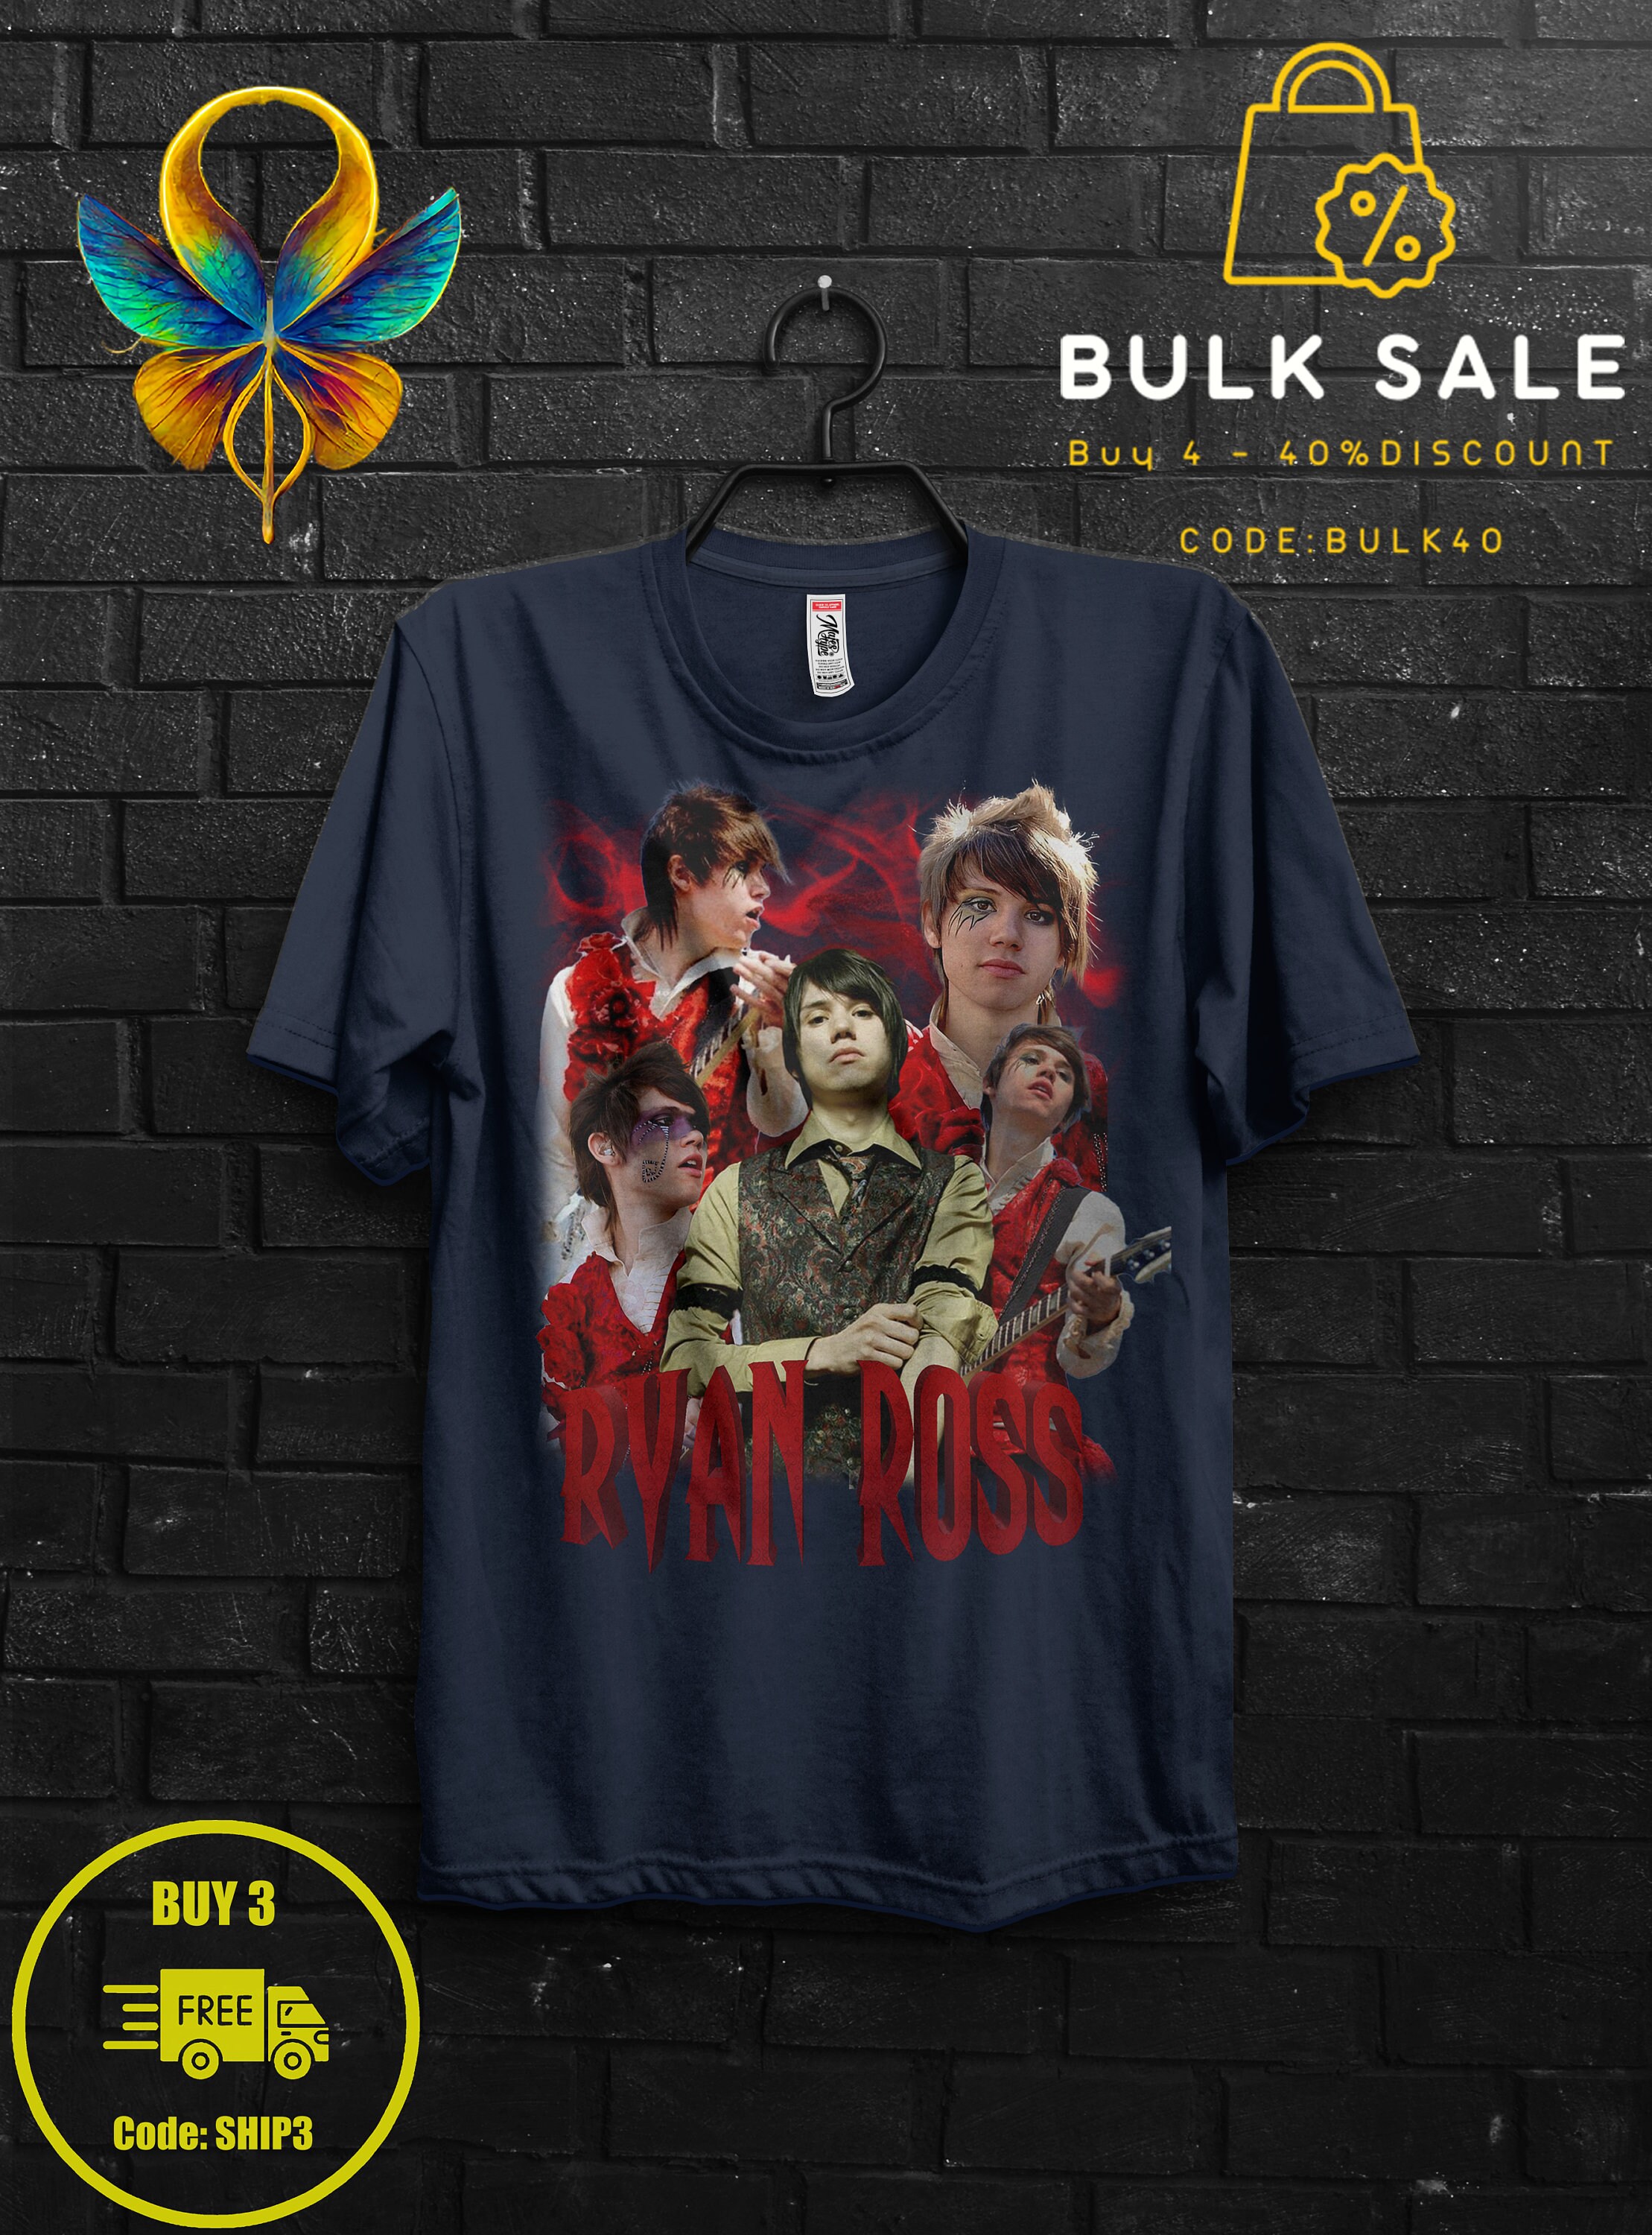 Ryan Ross Fan Gift TShirt,The Young Veins Emo Tee,Brendon Urie and John Walker Shirt,Afycso Appareal,Too Weird To Live Band,Widespread Panic 1546753314